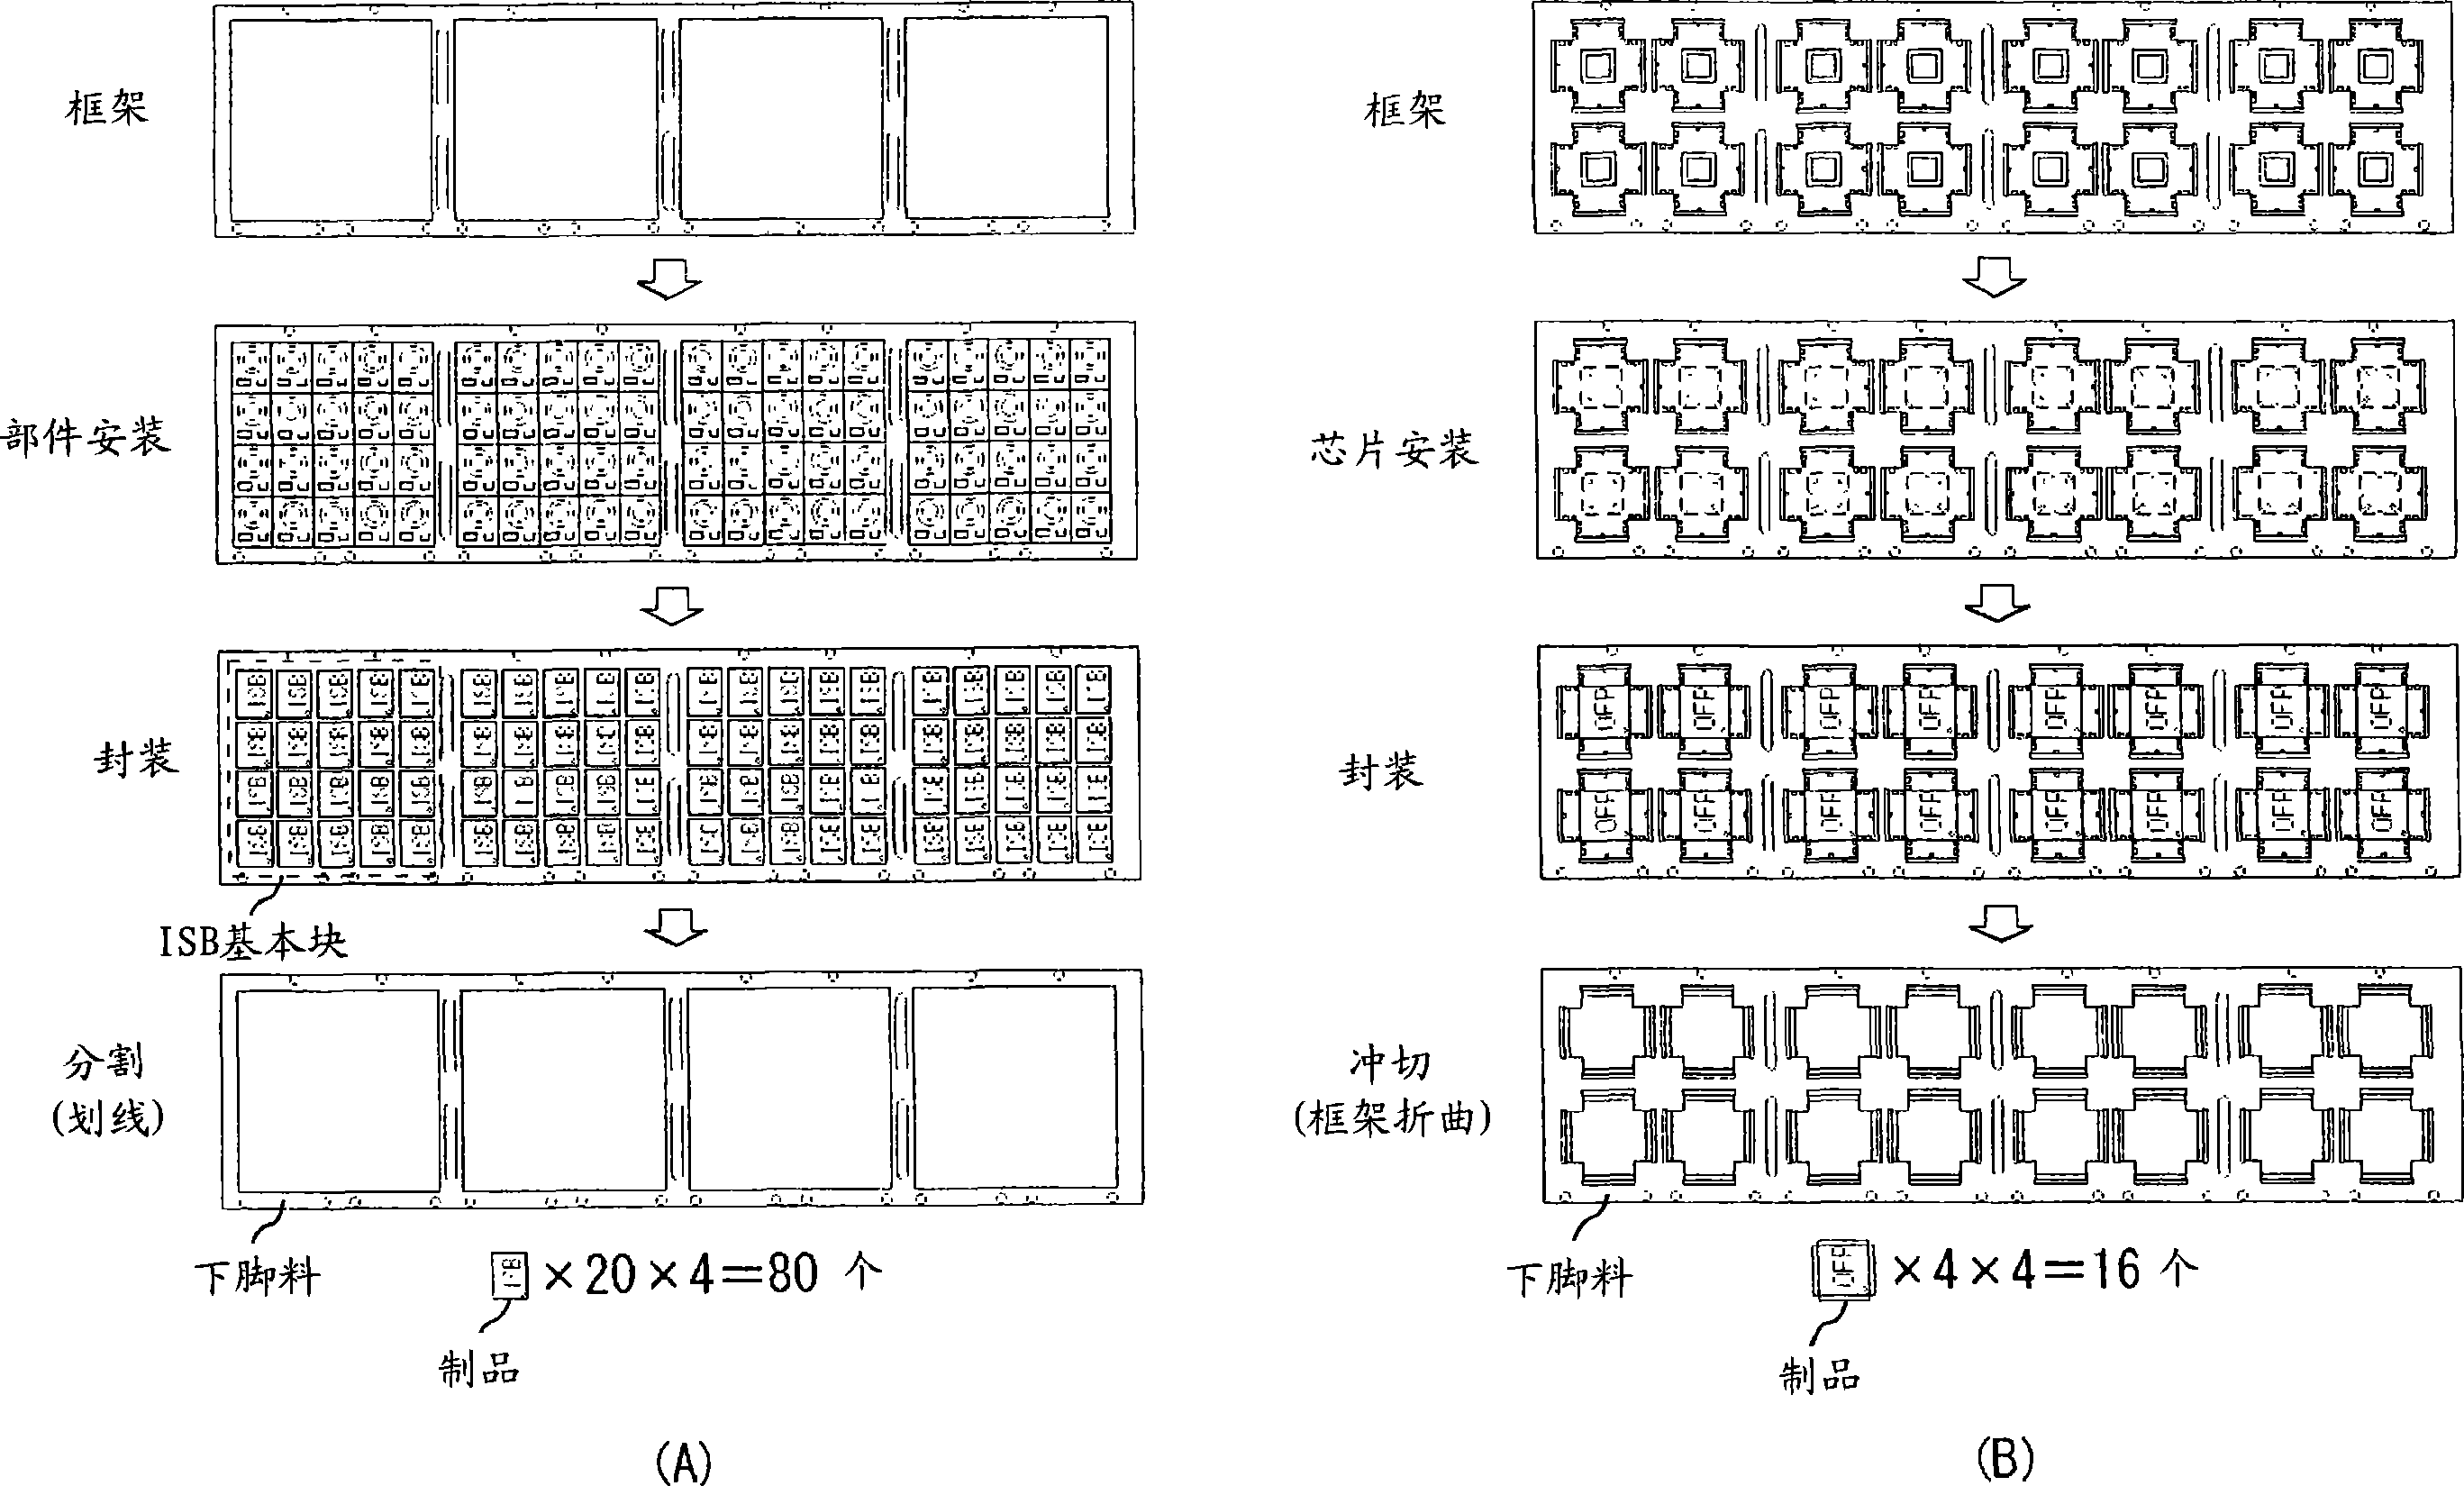 Semiconductor module including circuit device and insulating film, method for manufacturing same, and application of same